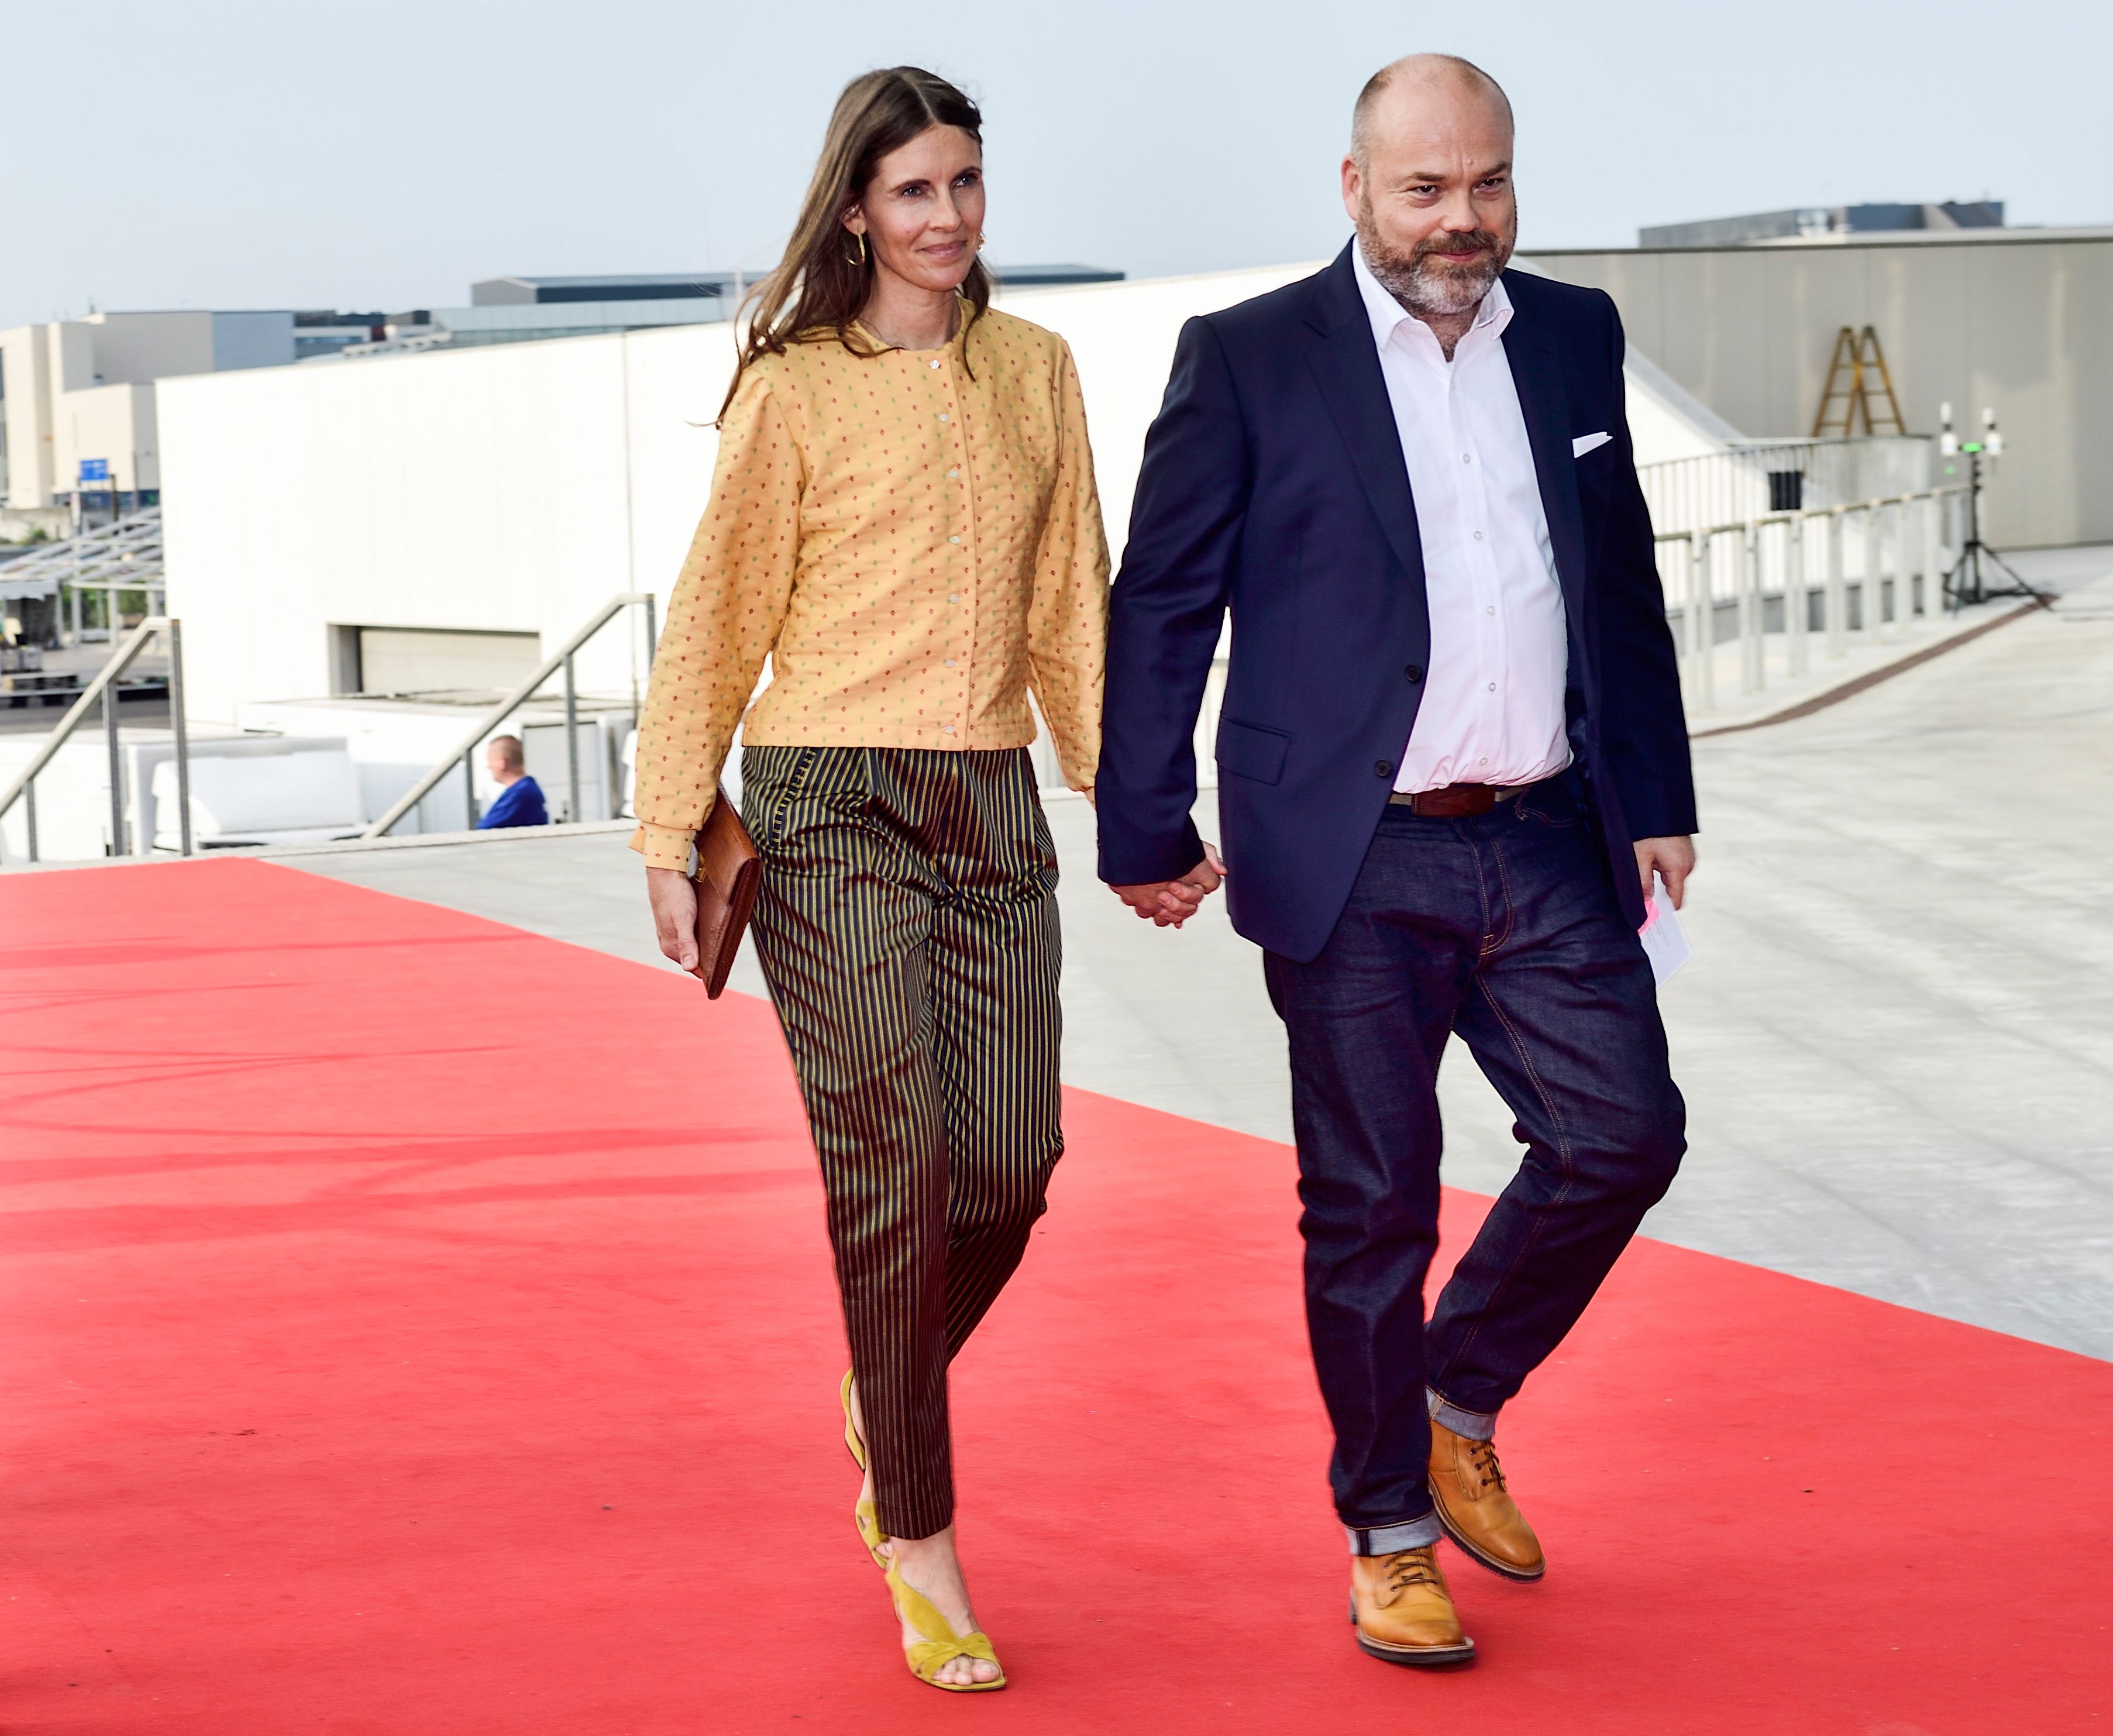 This picture taken on May 27, 2018 shows Bestseller-owner Anders Holch Povlsen and his wife Anne Holch Povlsen as they arrive at the celebration of the 50th birthday of Crown Prince Frederik of Denmark in Royal Arena in Copenhagen, Denmark. (TARIQ MIKKEL KHAN/AFP/Getty Images)